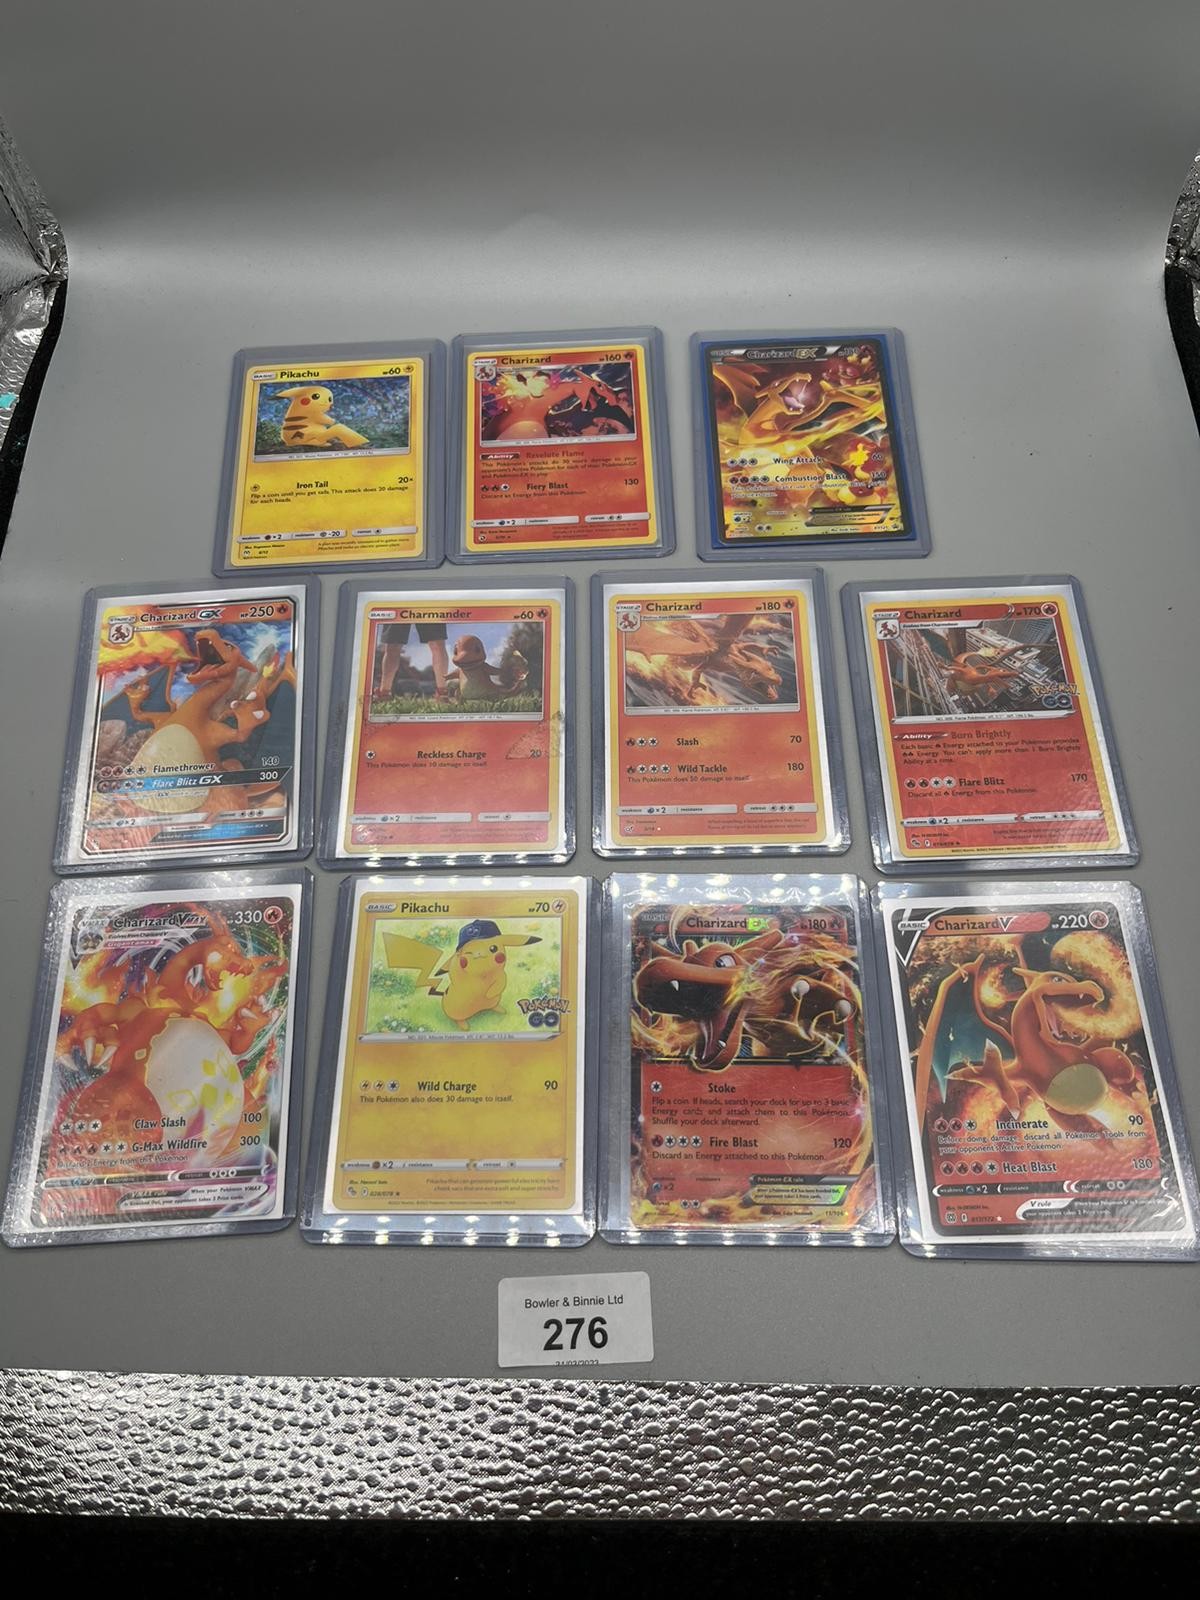 A Collection of protected Pokemon Charizard, Pikachu and Charmander